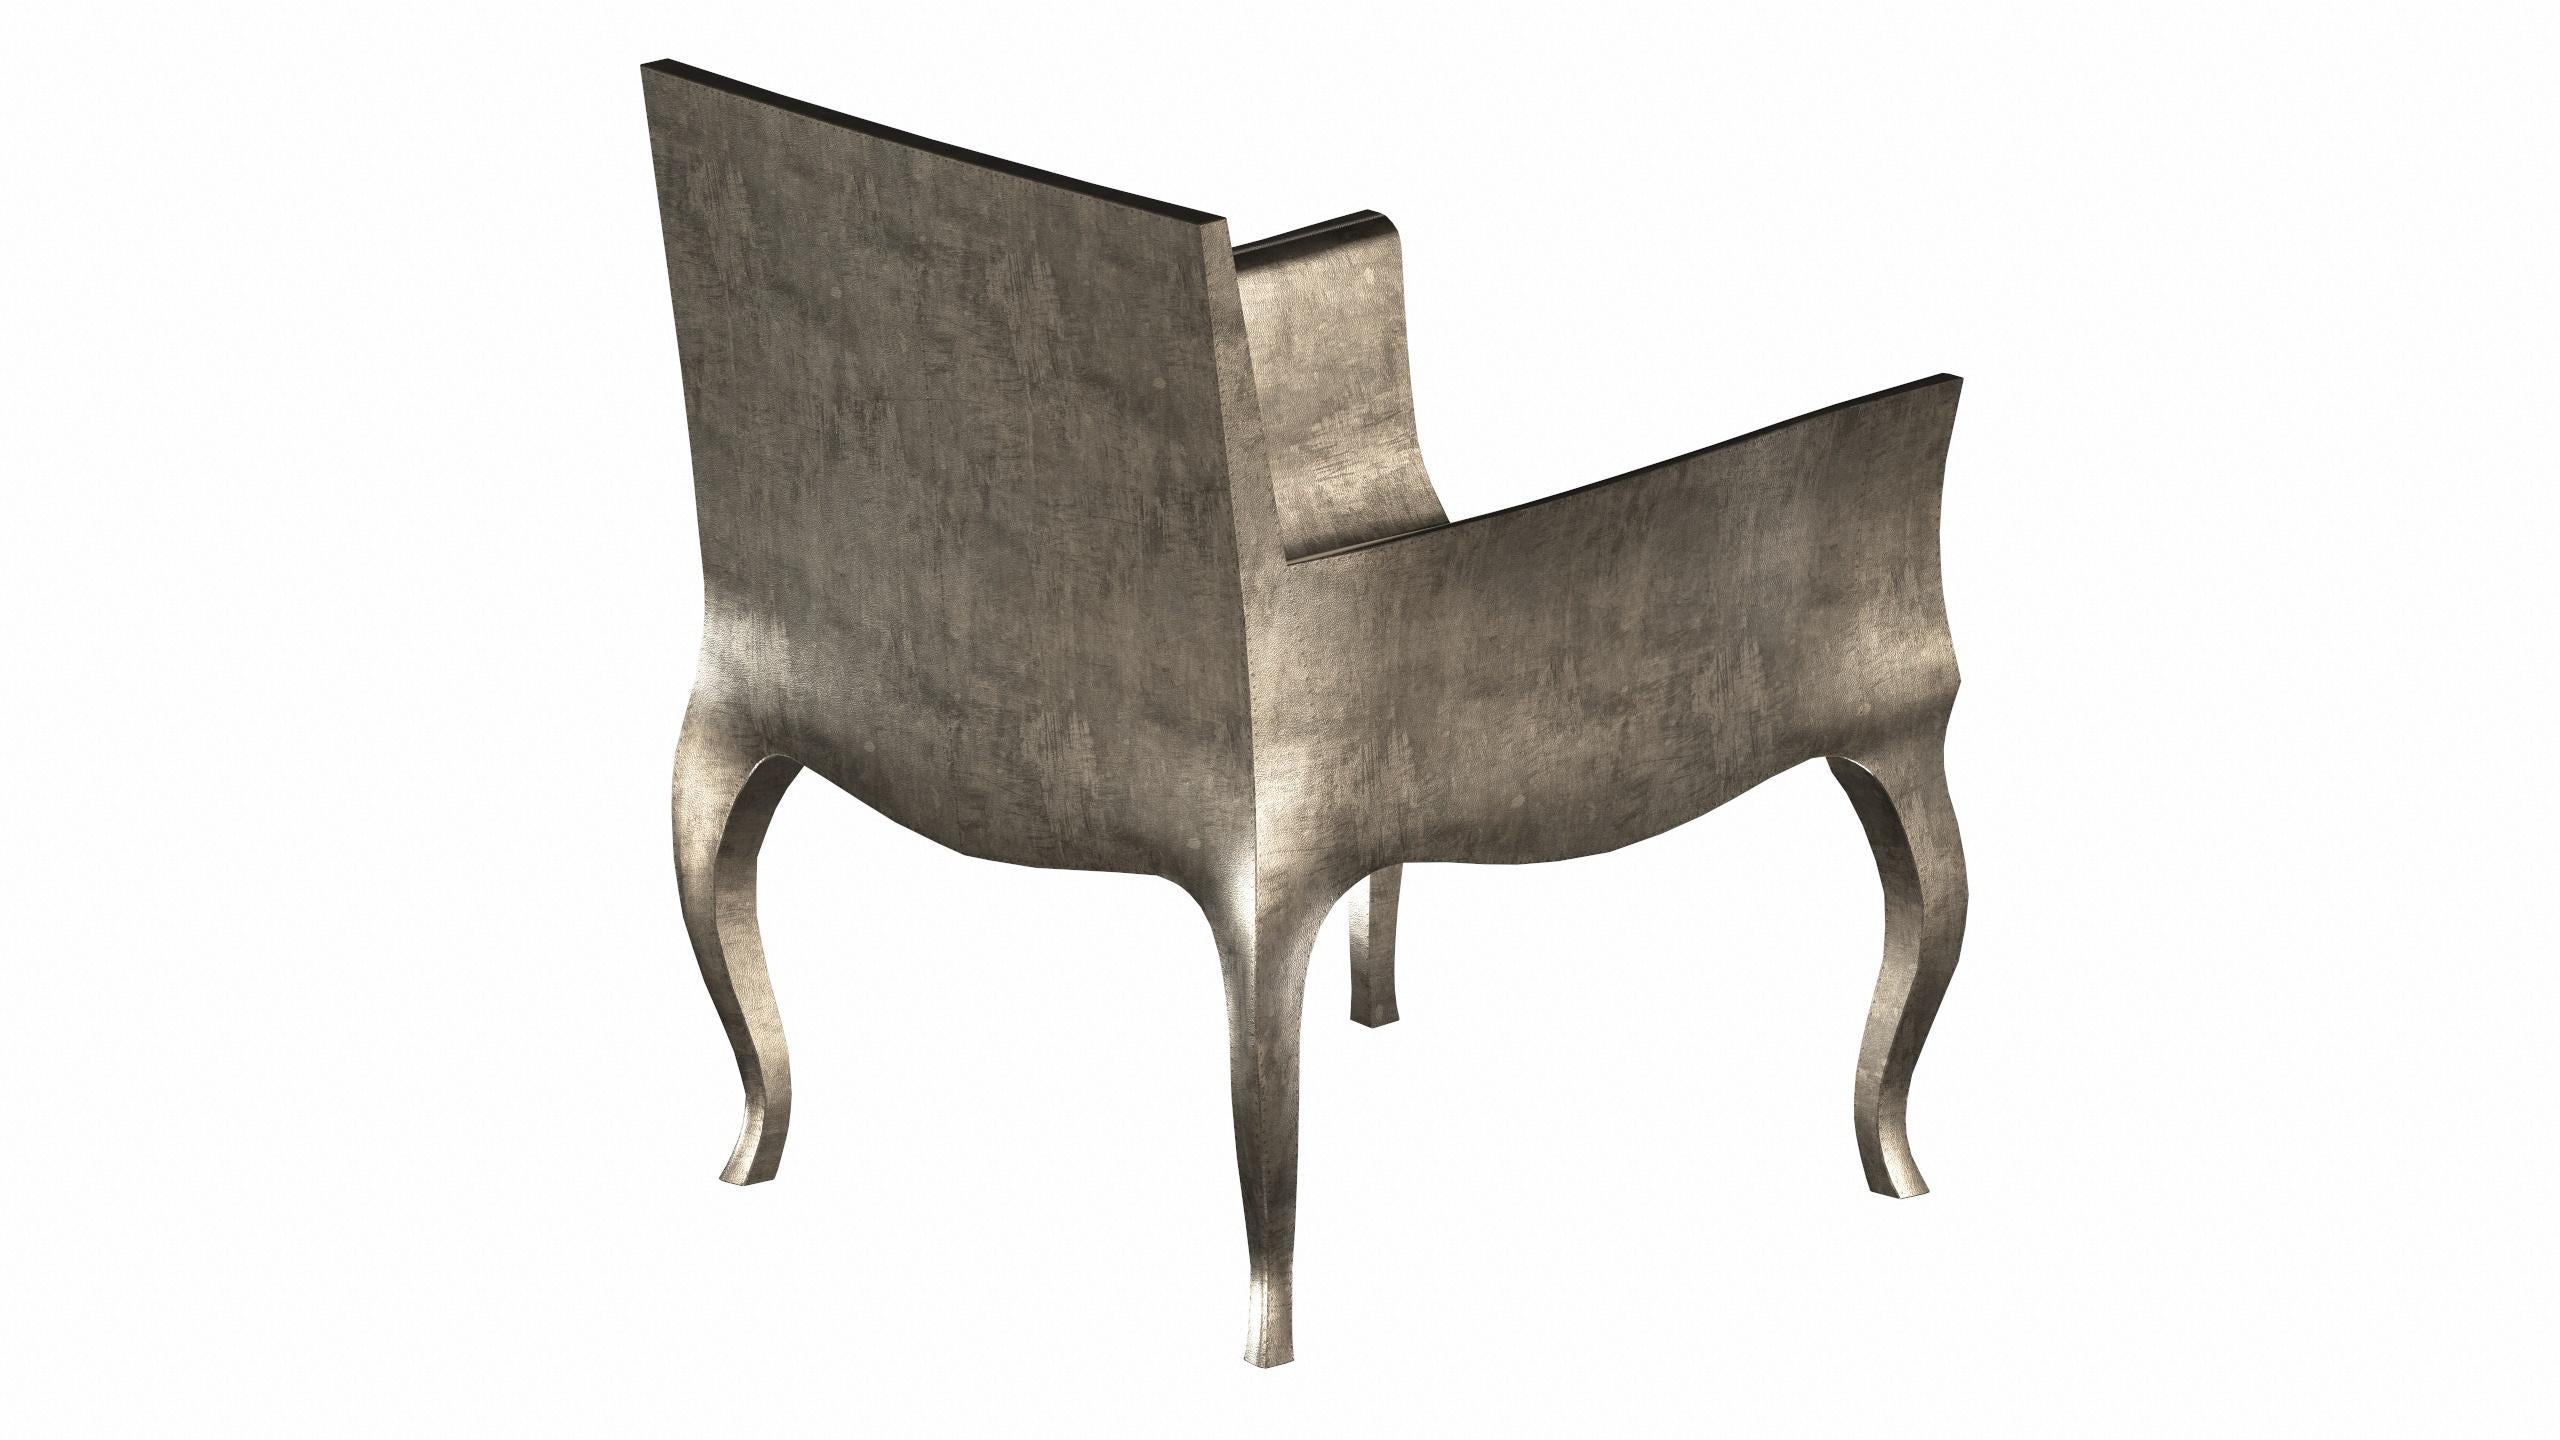 Metal Art Nouveau Chairs Fine Hammered in Antique White Bronze by Paul Mathieu For Sale